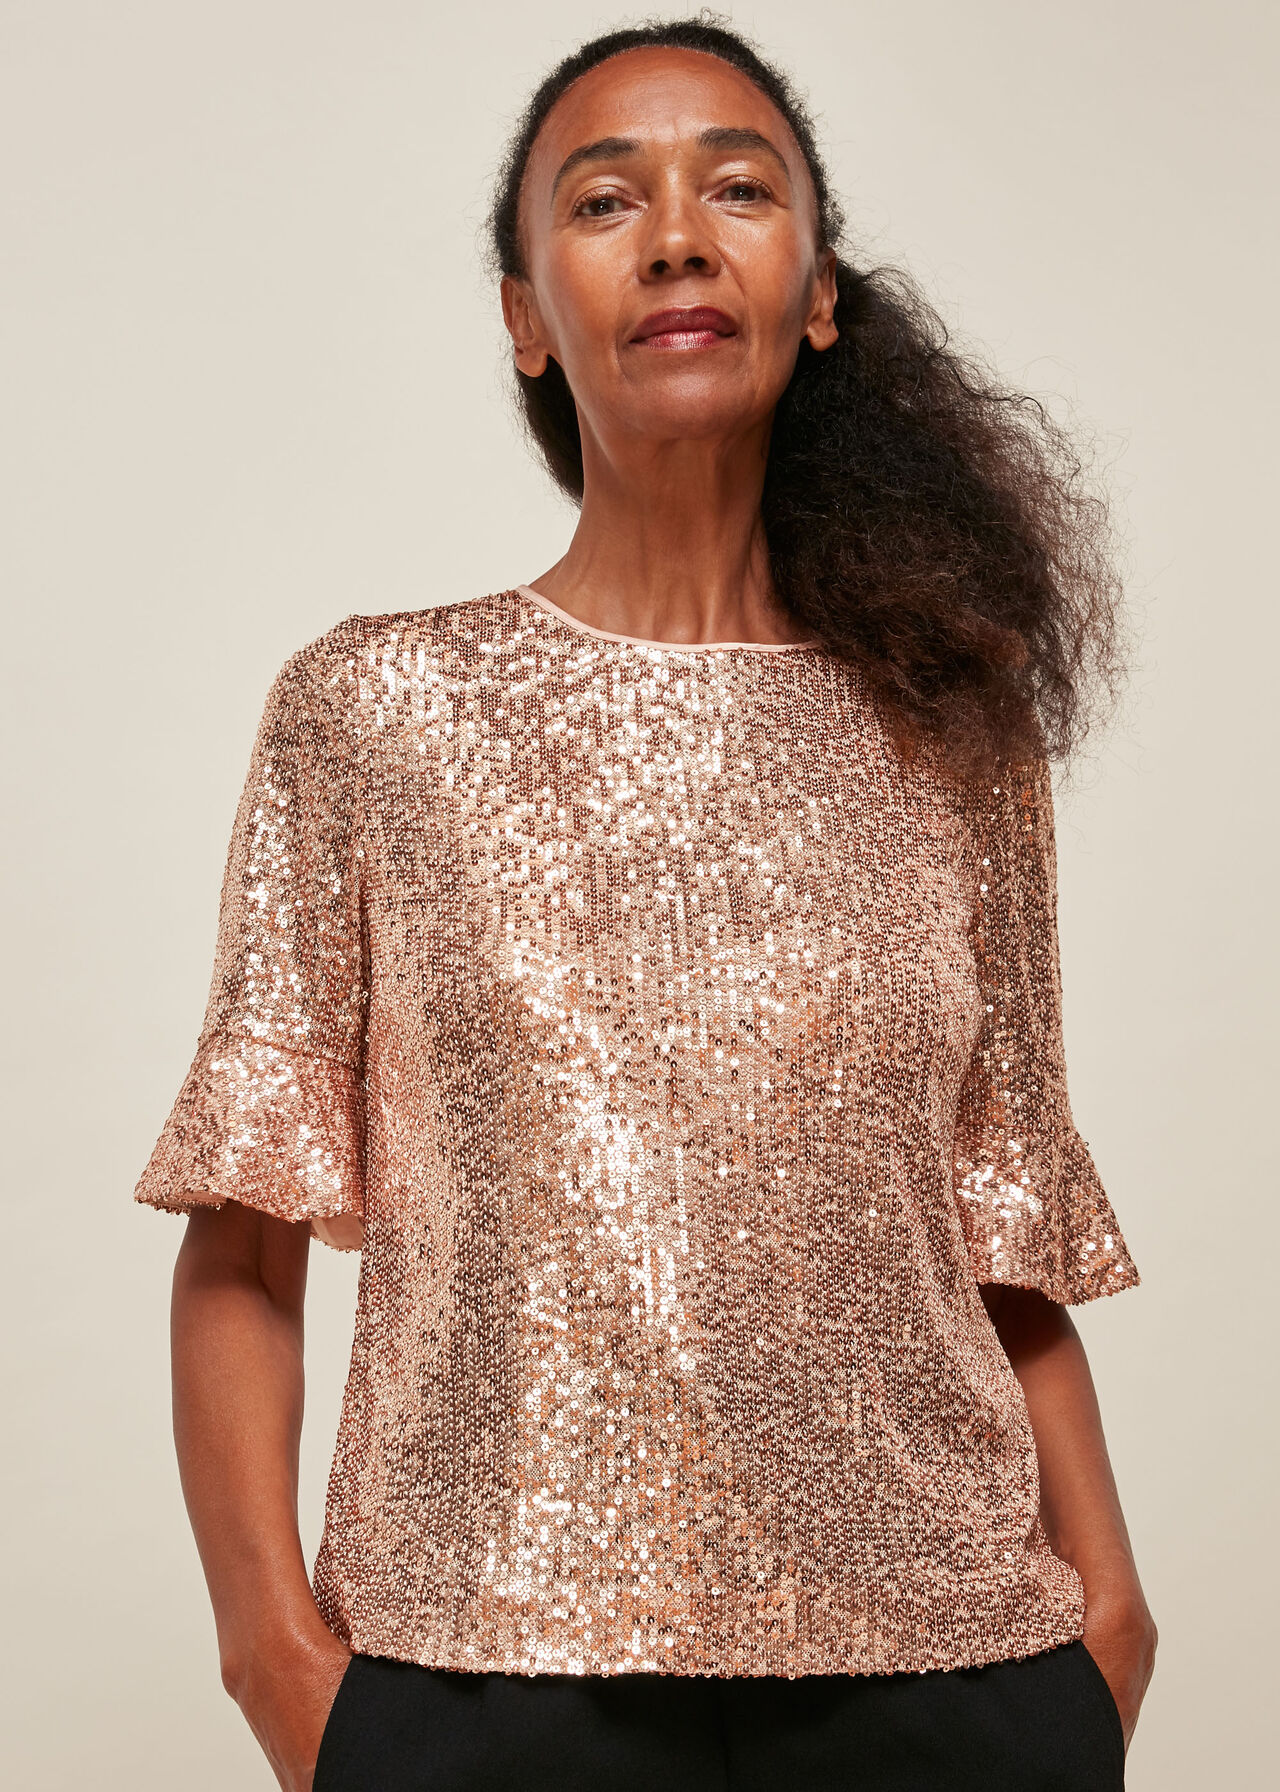 By-product color Make a snowman Champagne Sada Sequin Top | WHISTLES 